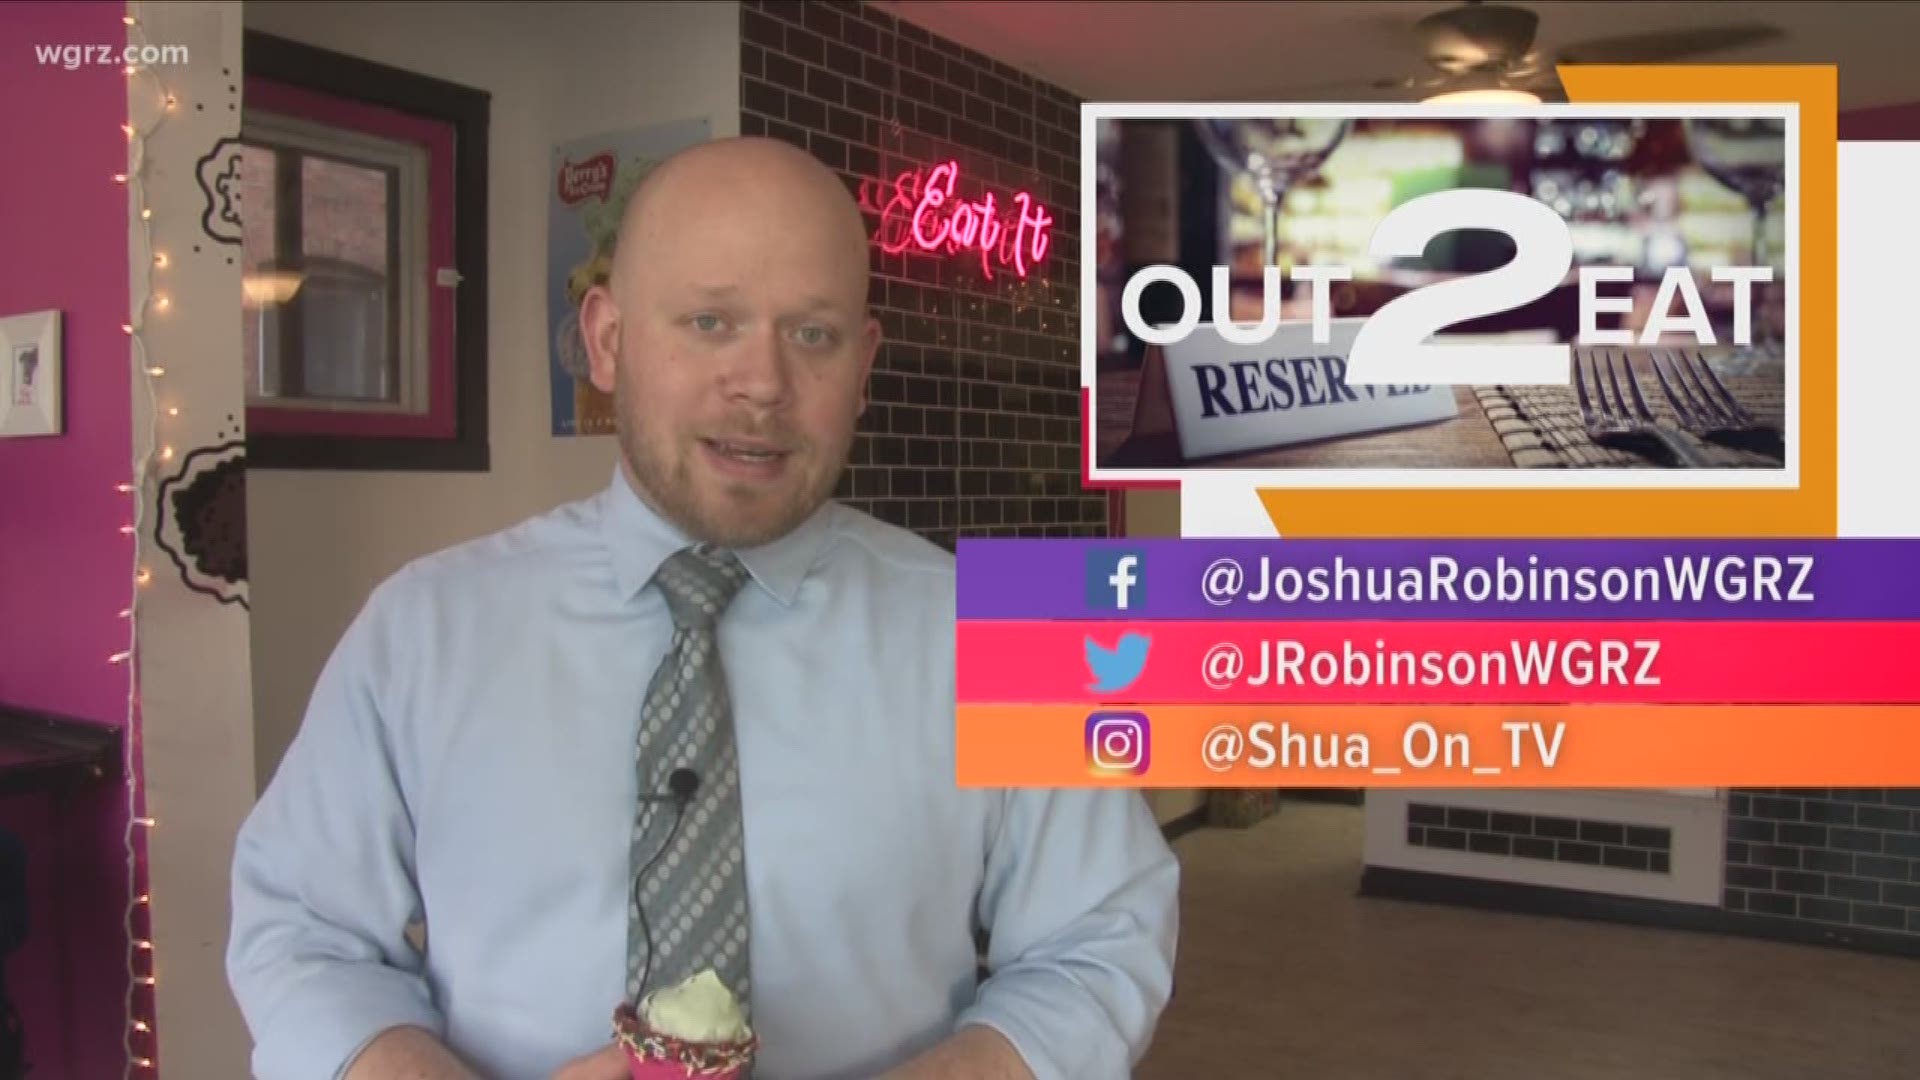 This week in Out 2 Eat, reporter and former chef Joshua Robinson looks at the local ice cream scene, to find some unexpected surprises and hidden gems you may not know about